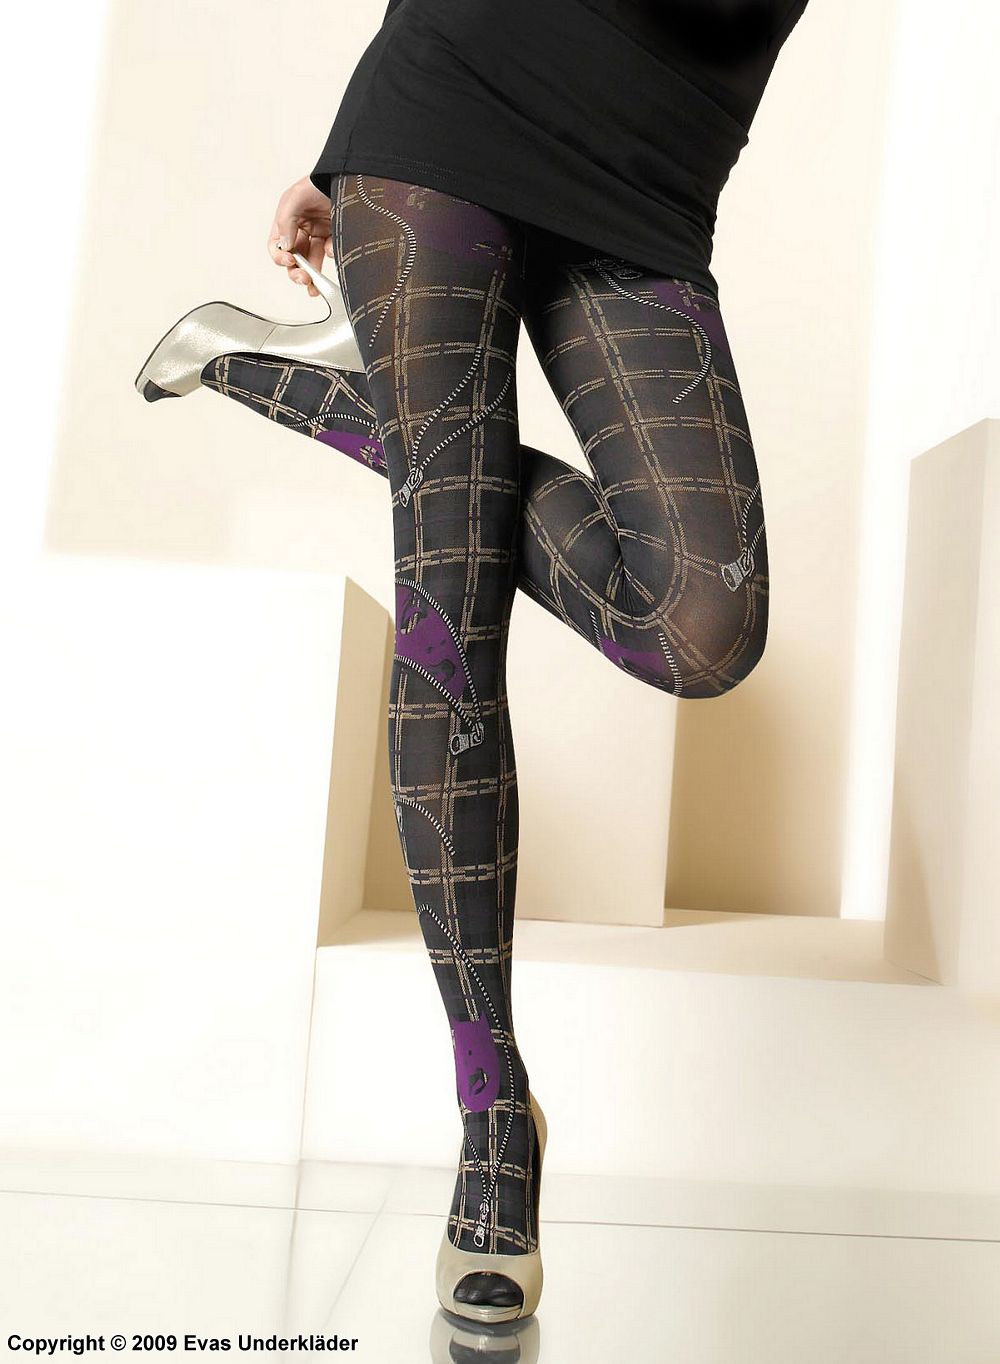 Tights with zipper designs